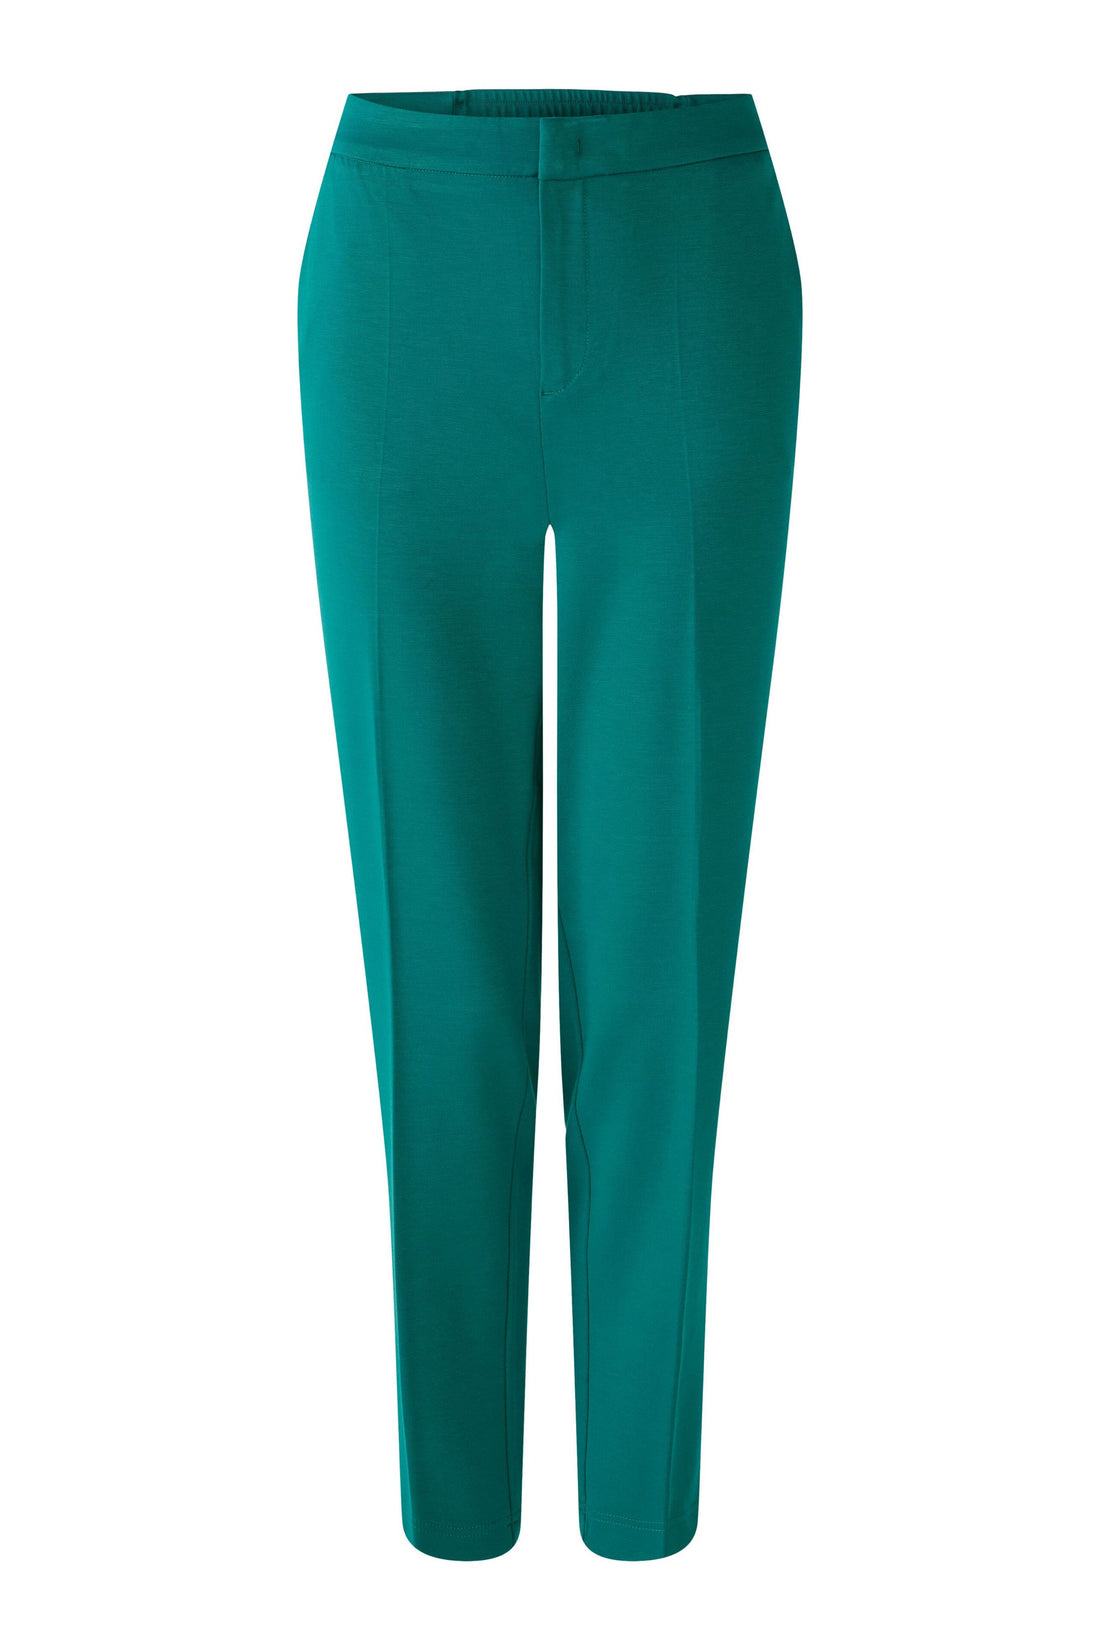 Green Dress Trousers With Center Pleat_80136_6448_01